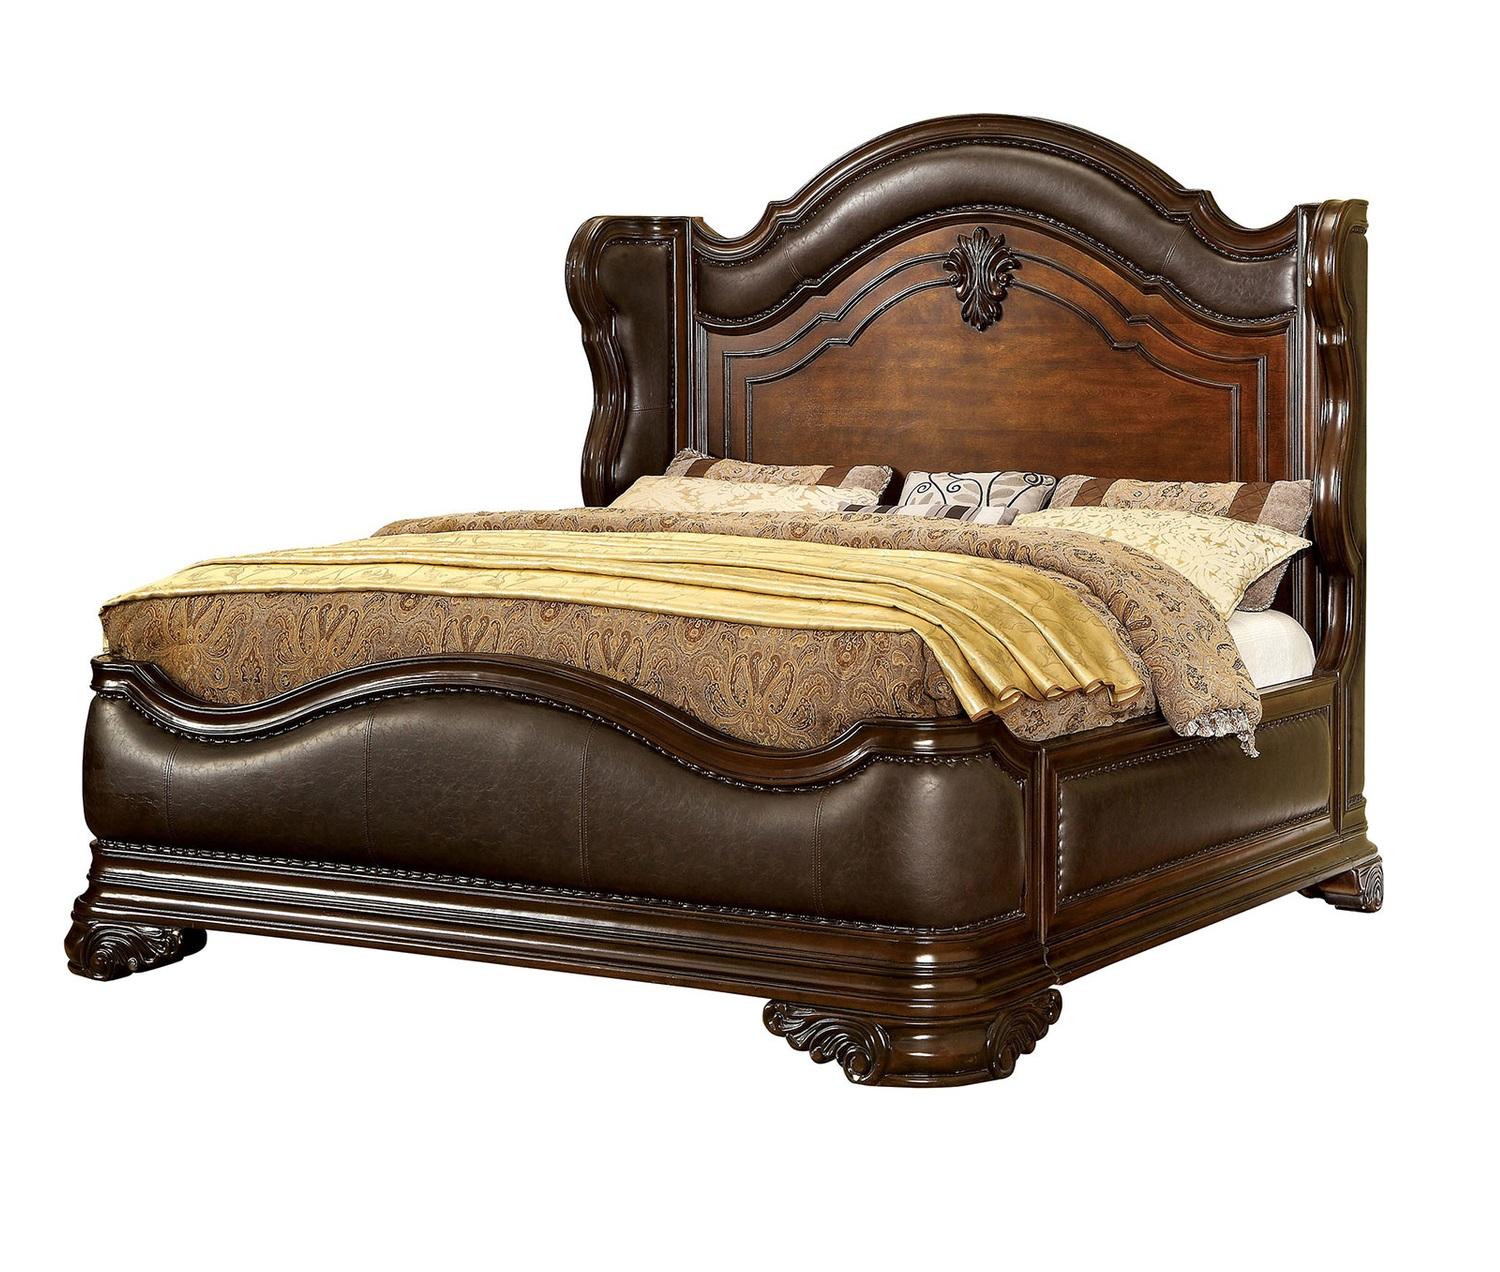 

    
Traditional Brown Cherry Solid Wood King Bedroom Set 5pcs Furniture of America CM7859 Arcturus
